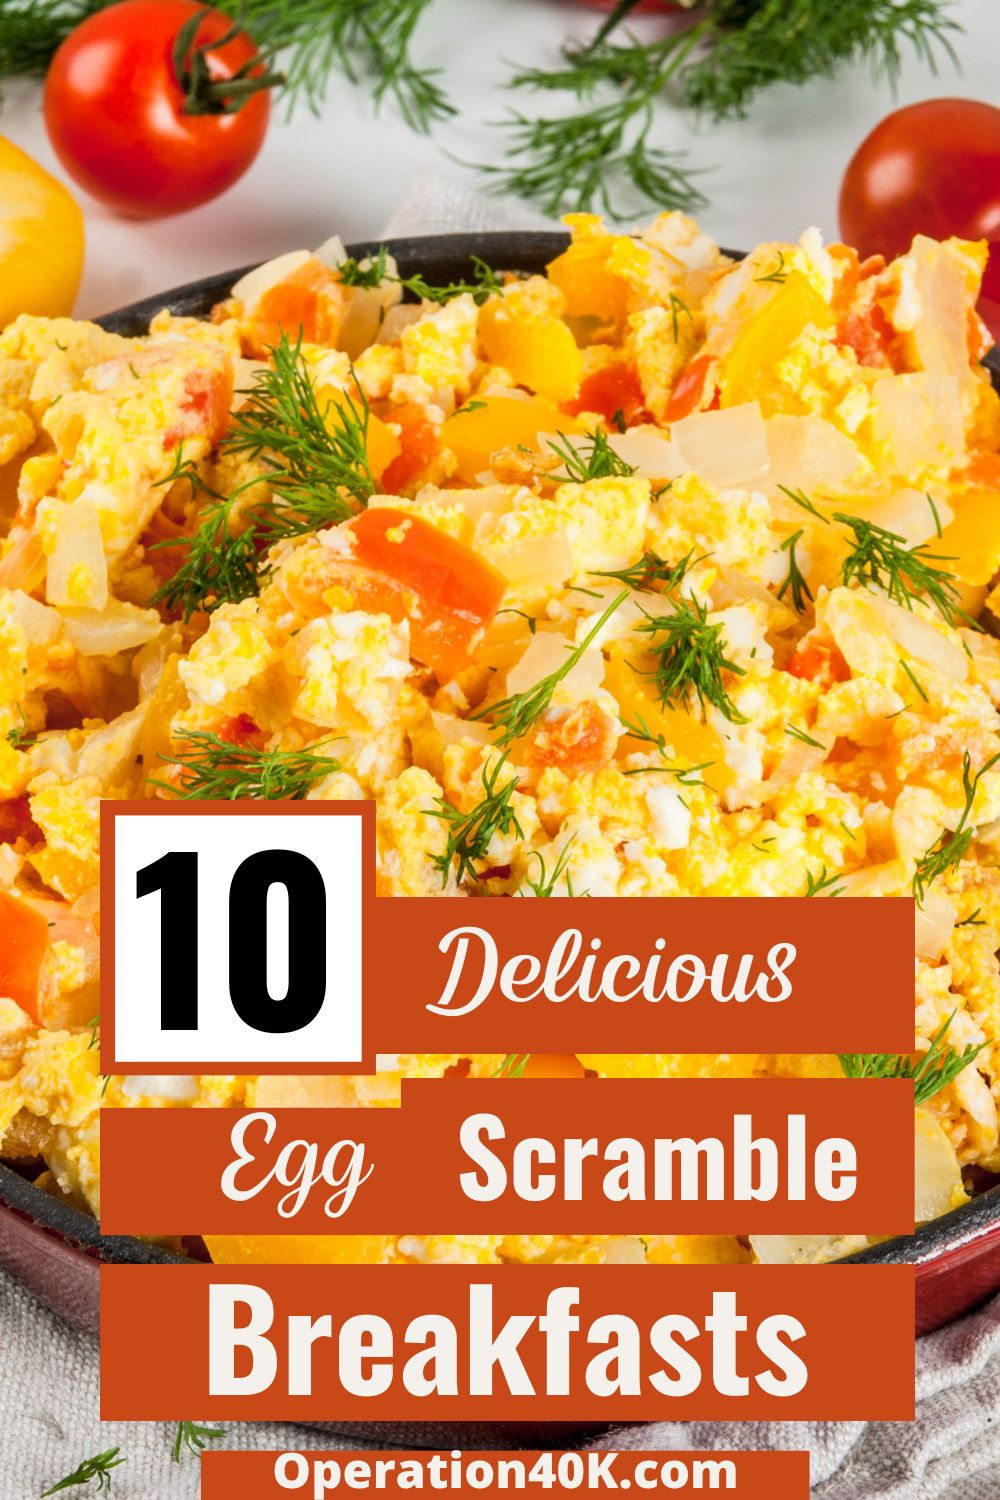 Breakfast Scramble Ideas: 10 Delicious Recipes to Try Today